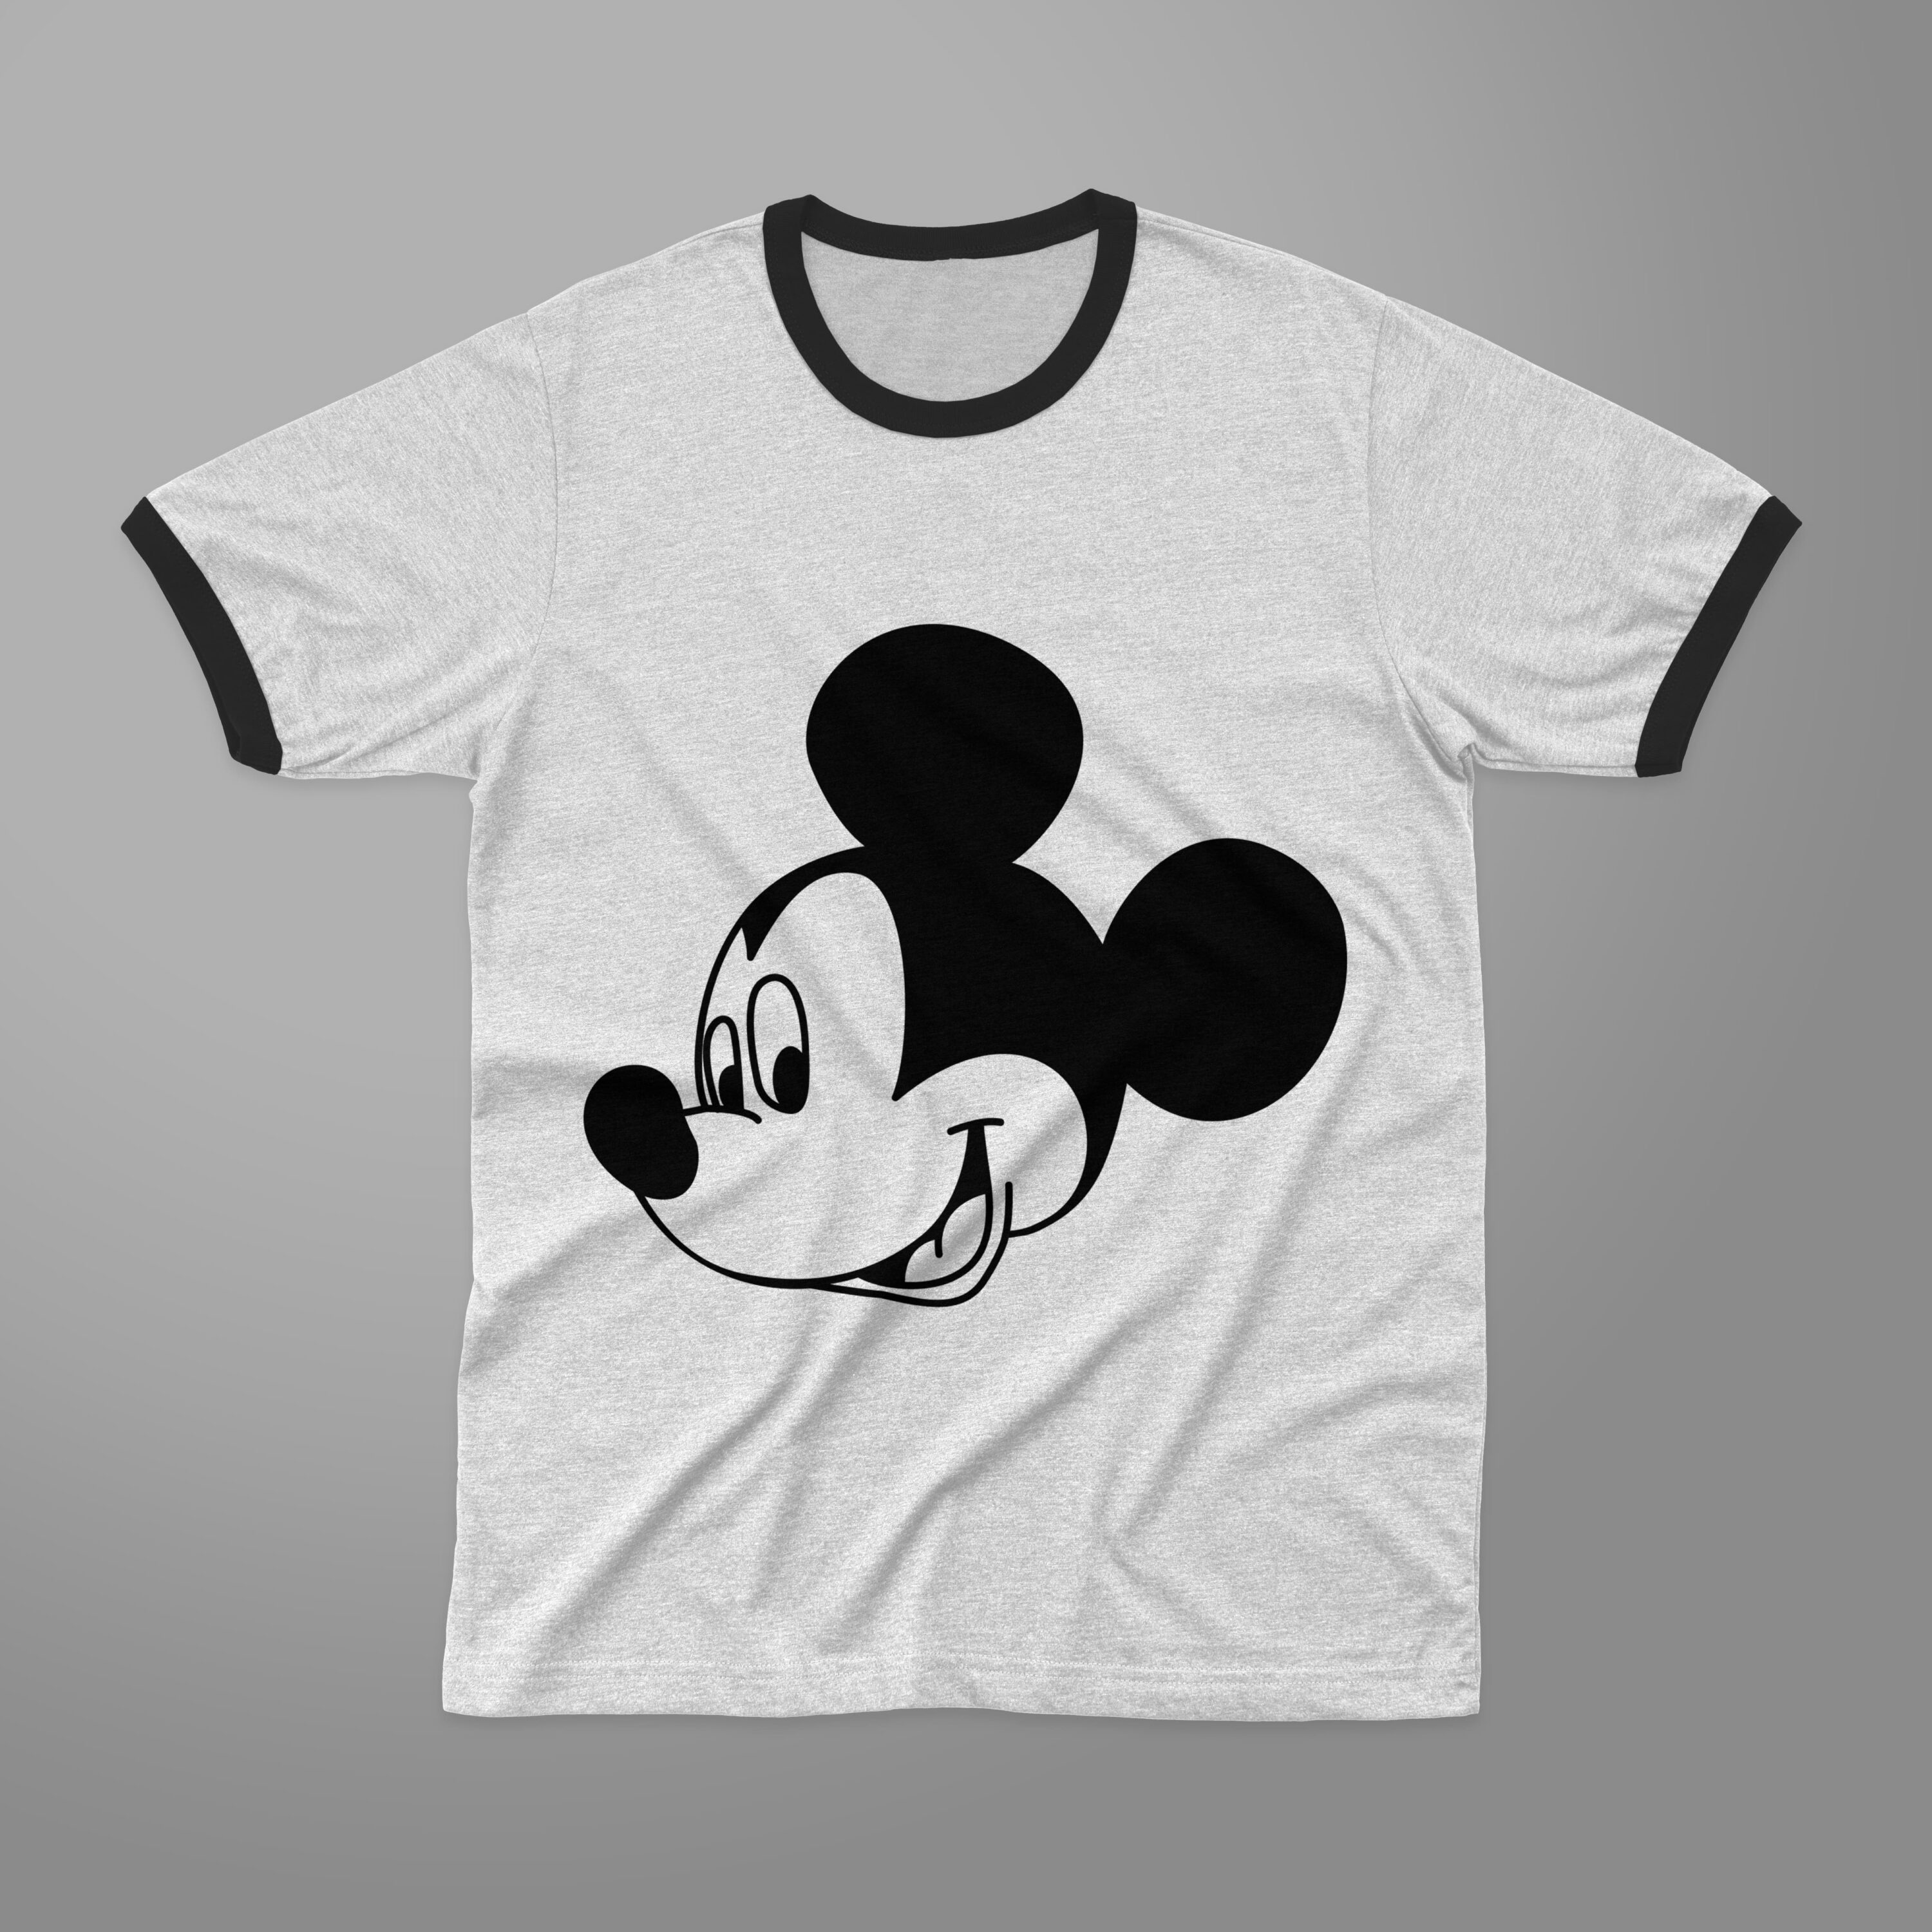 Disney mickey mouse for your t-shirt.